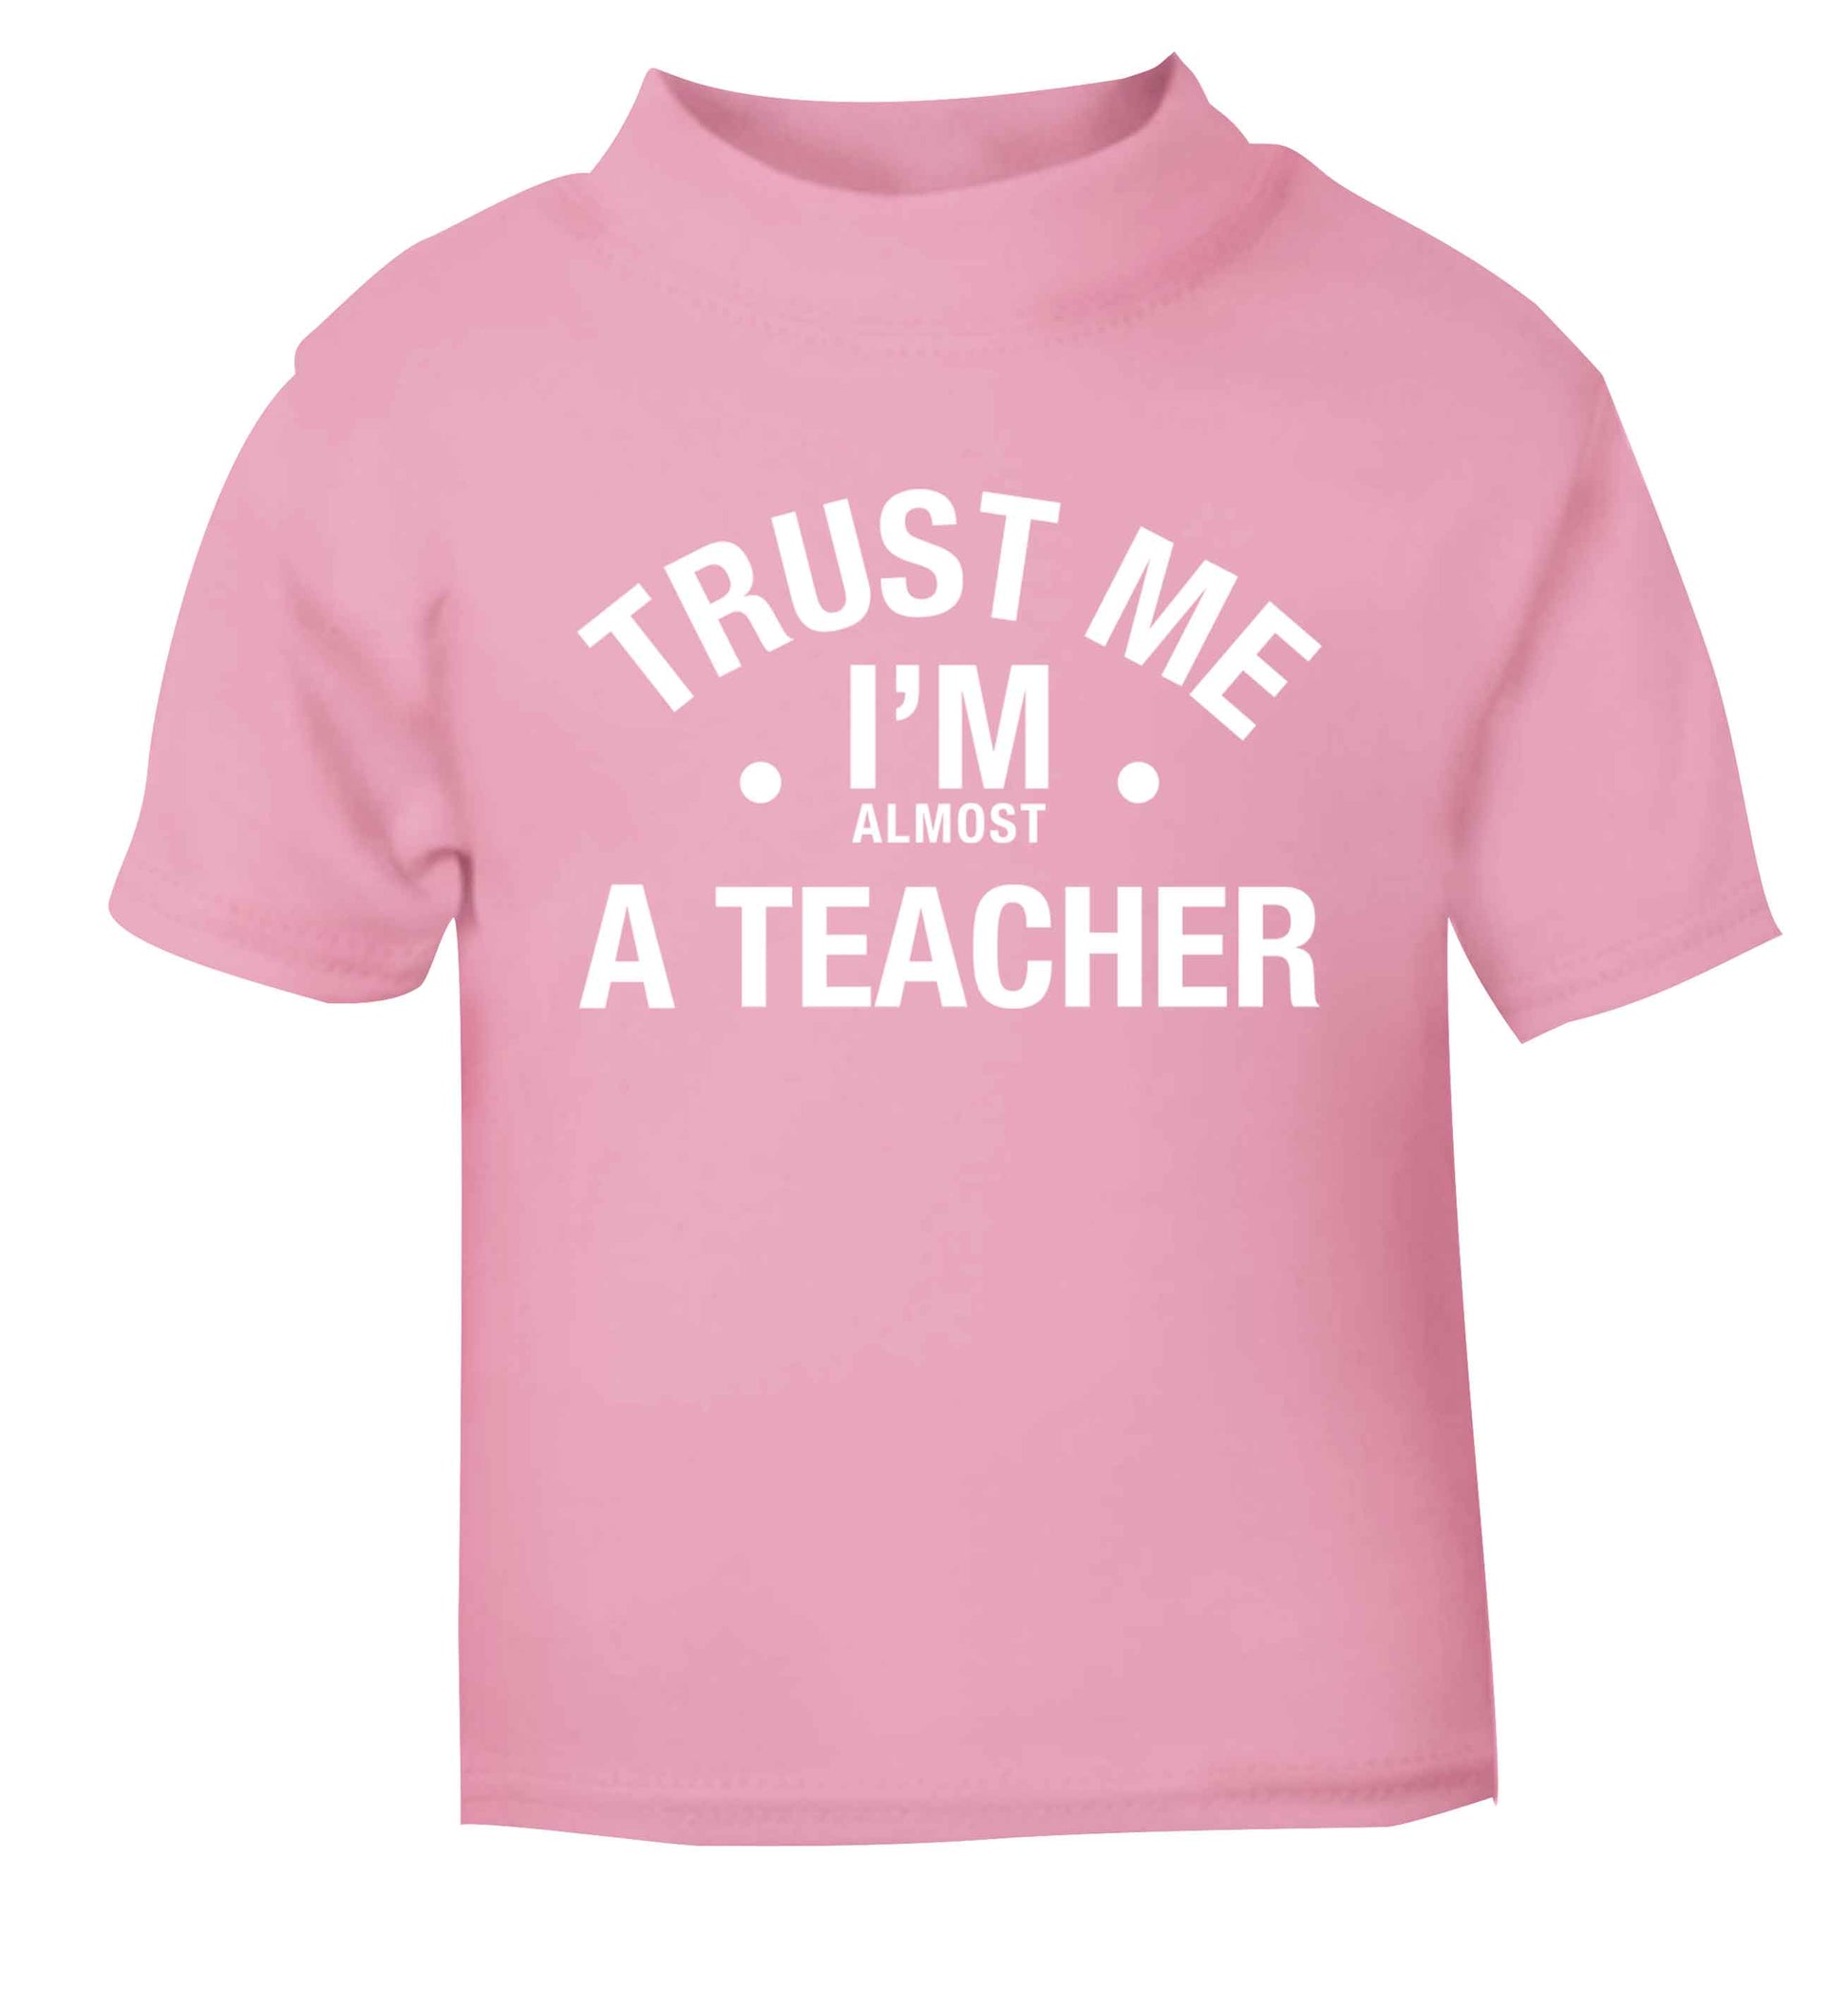 Trust me I'm almost a teacher light pink baby toddler Tshirt 2 Years